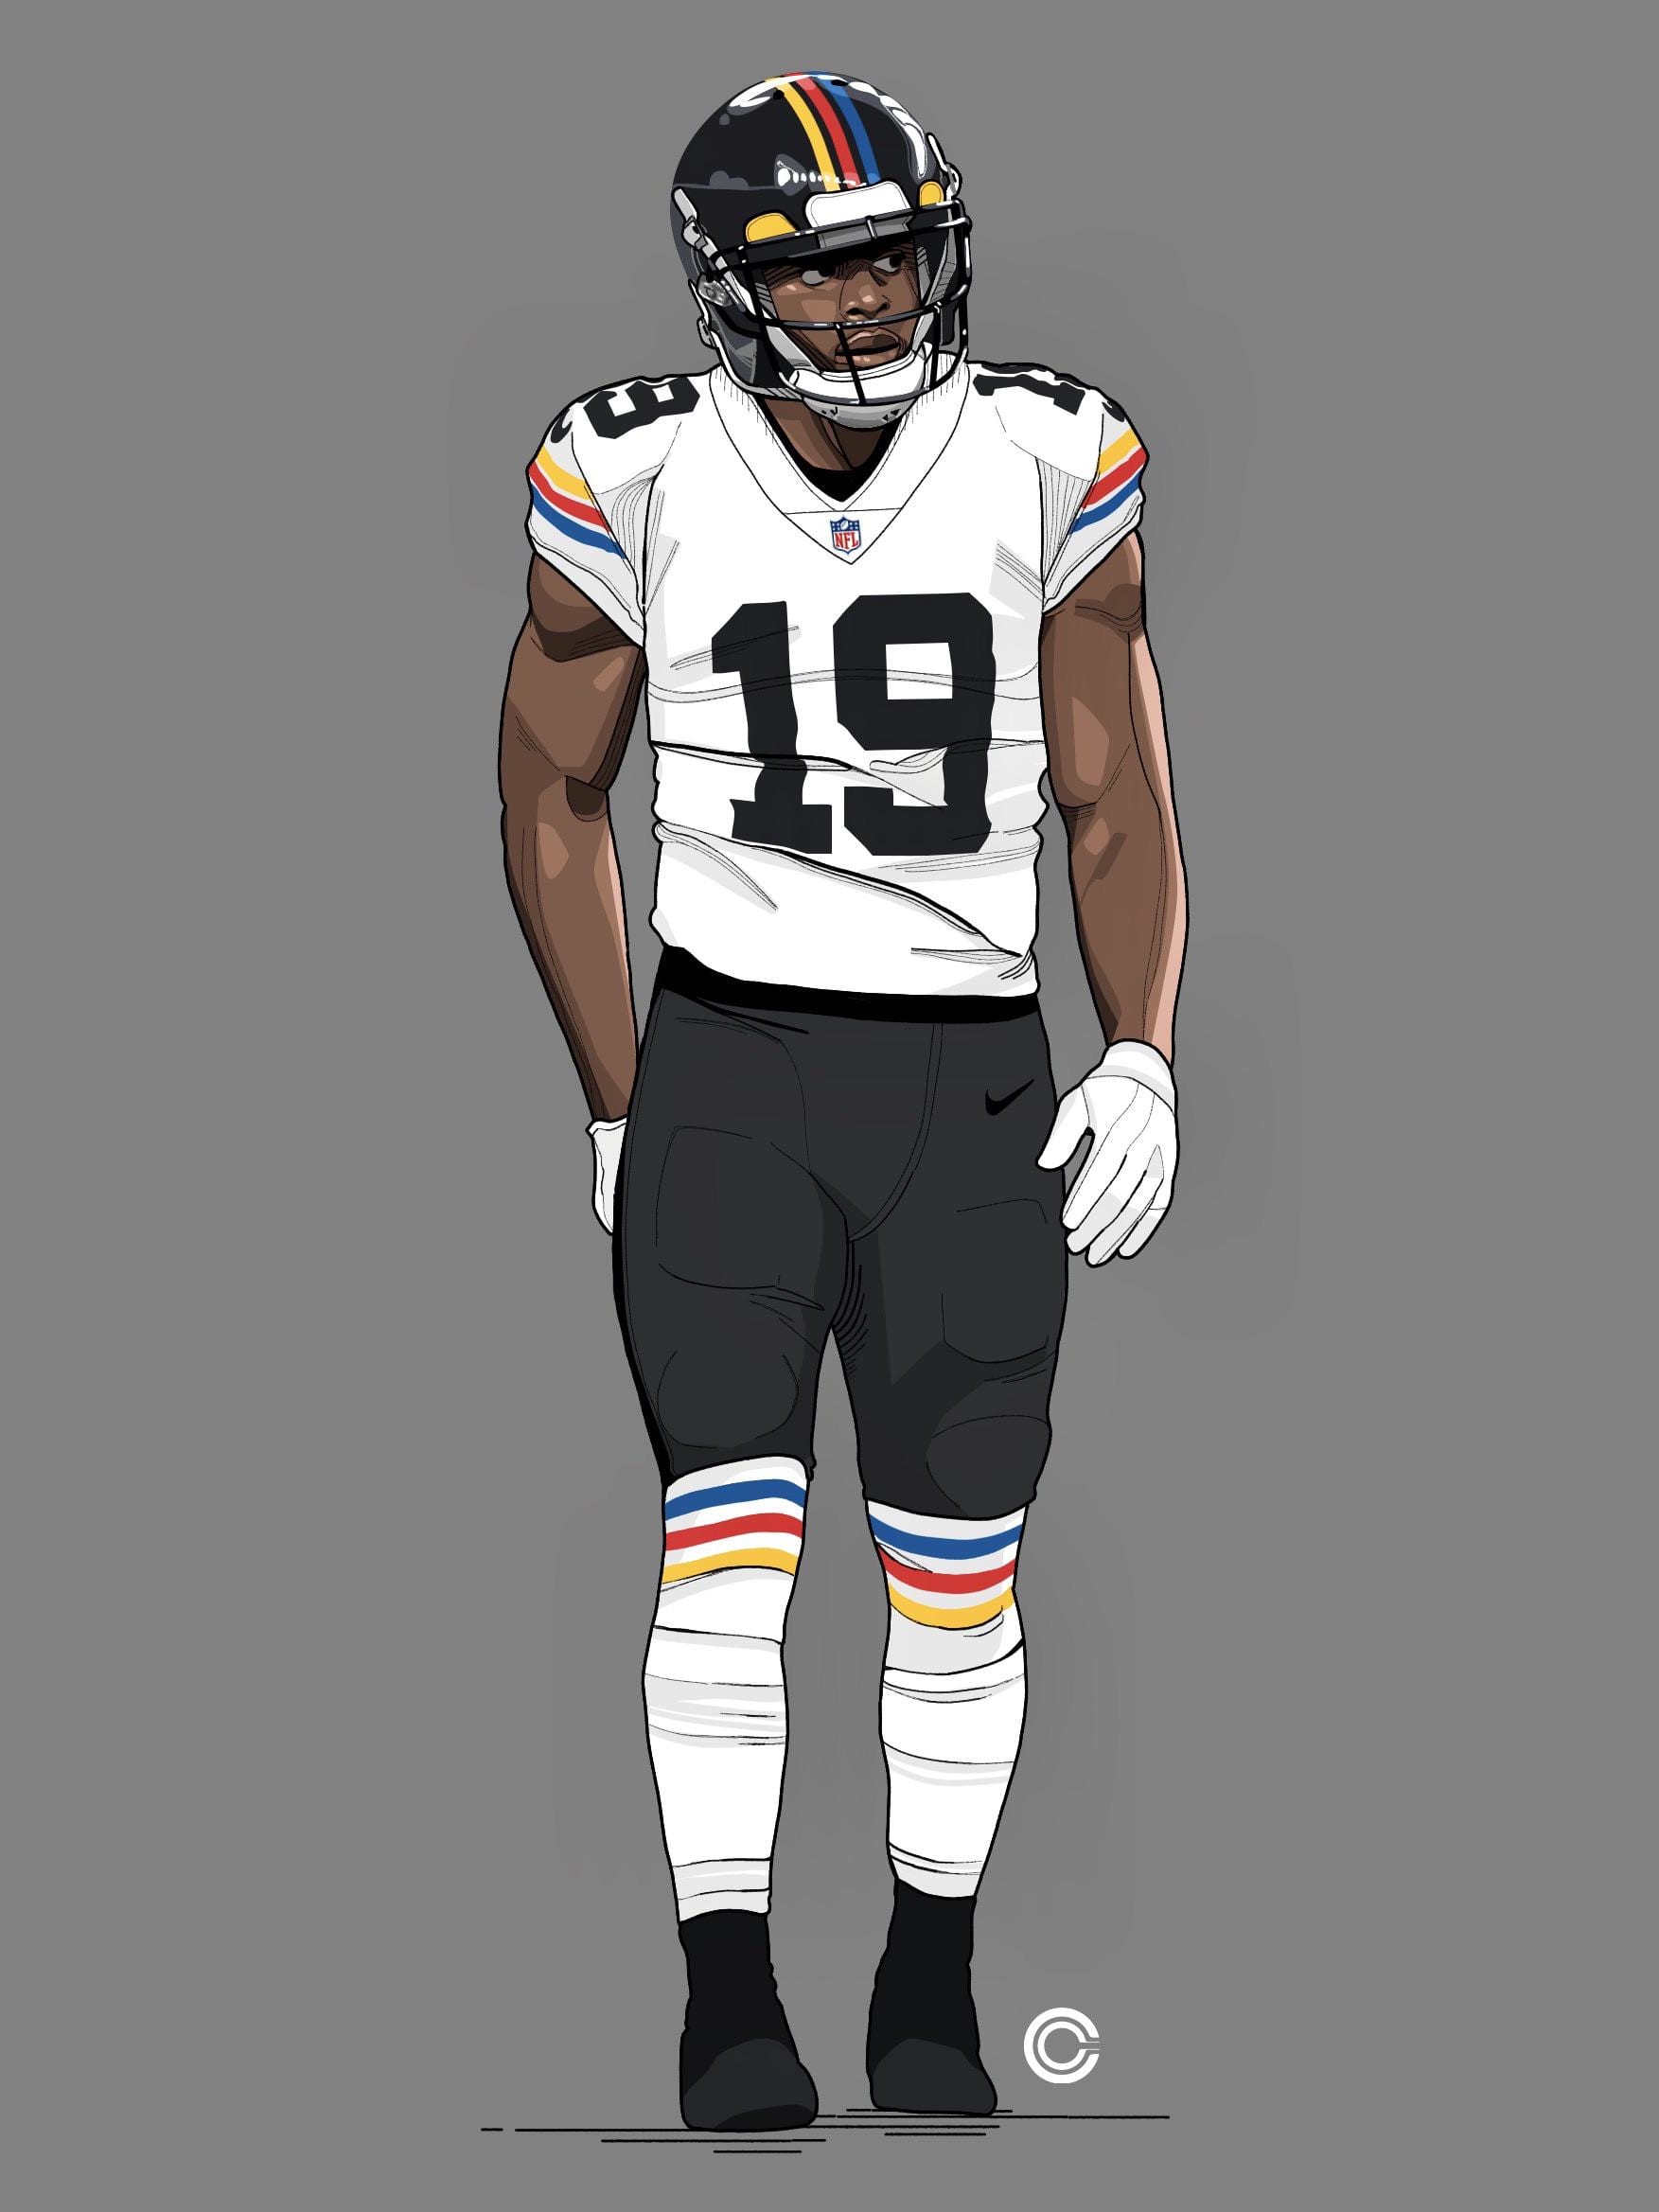 Steel uniform concept for the #Steelers! 🔥 or